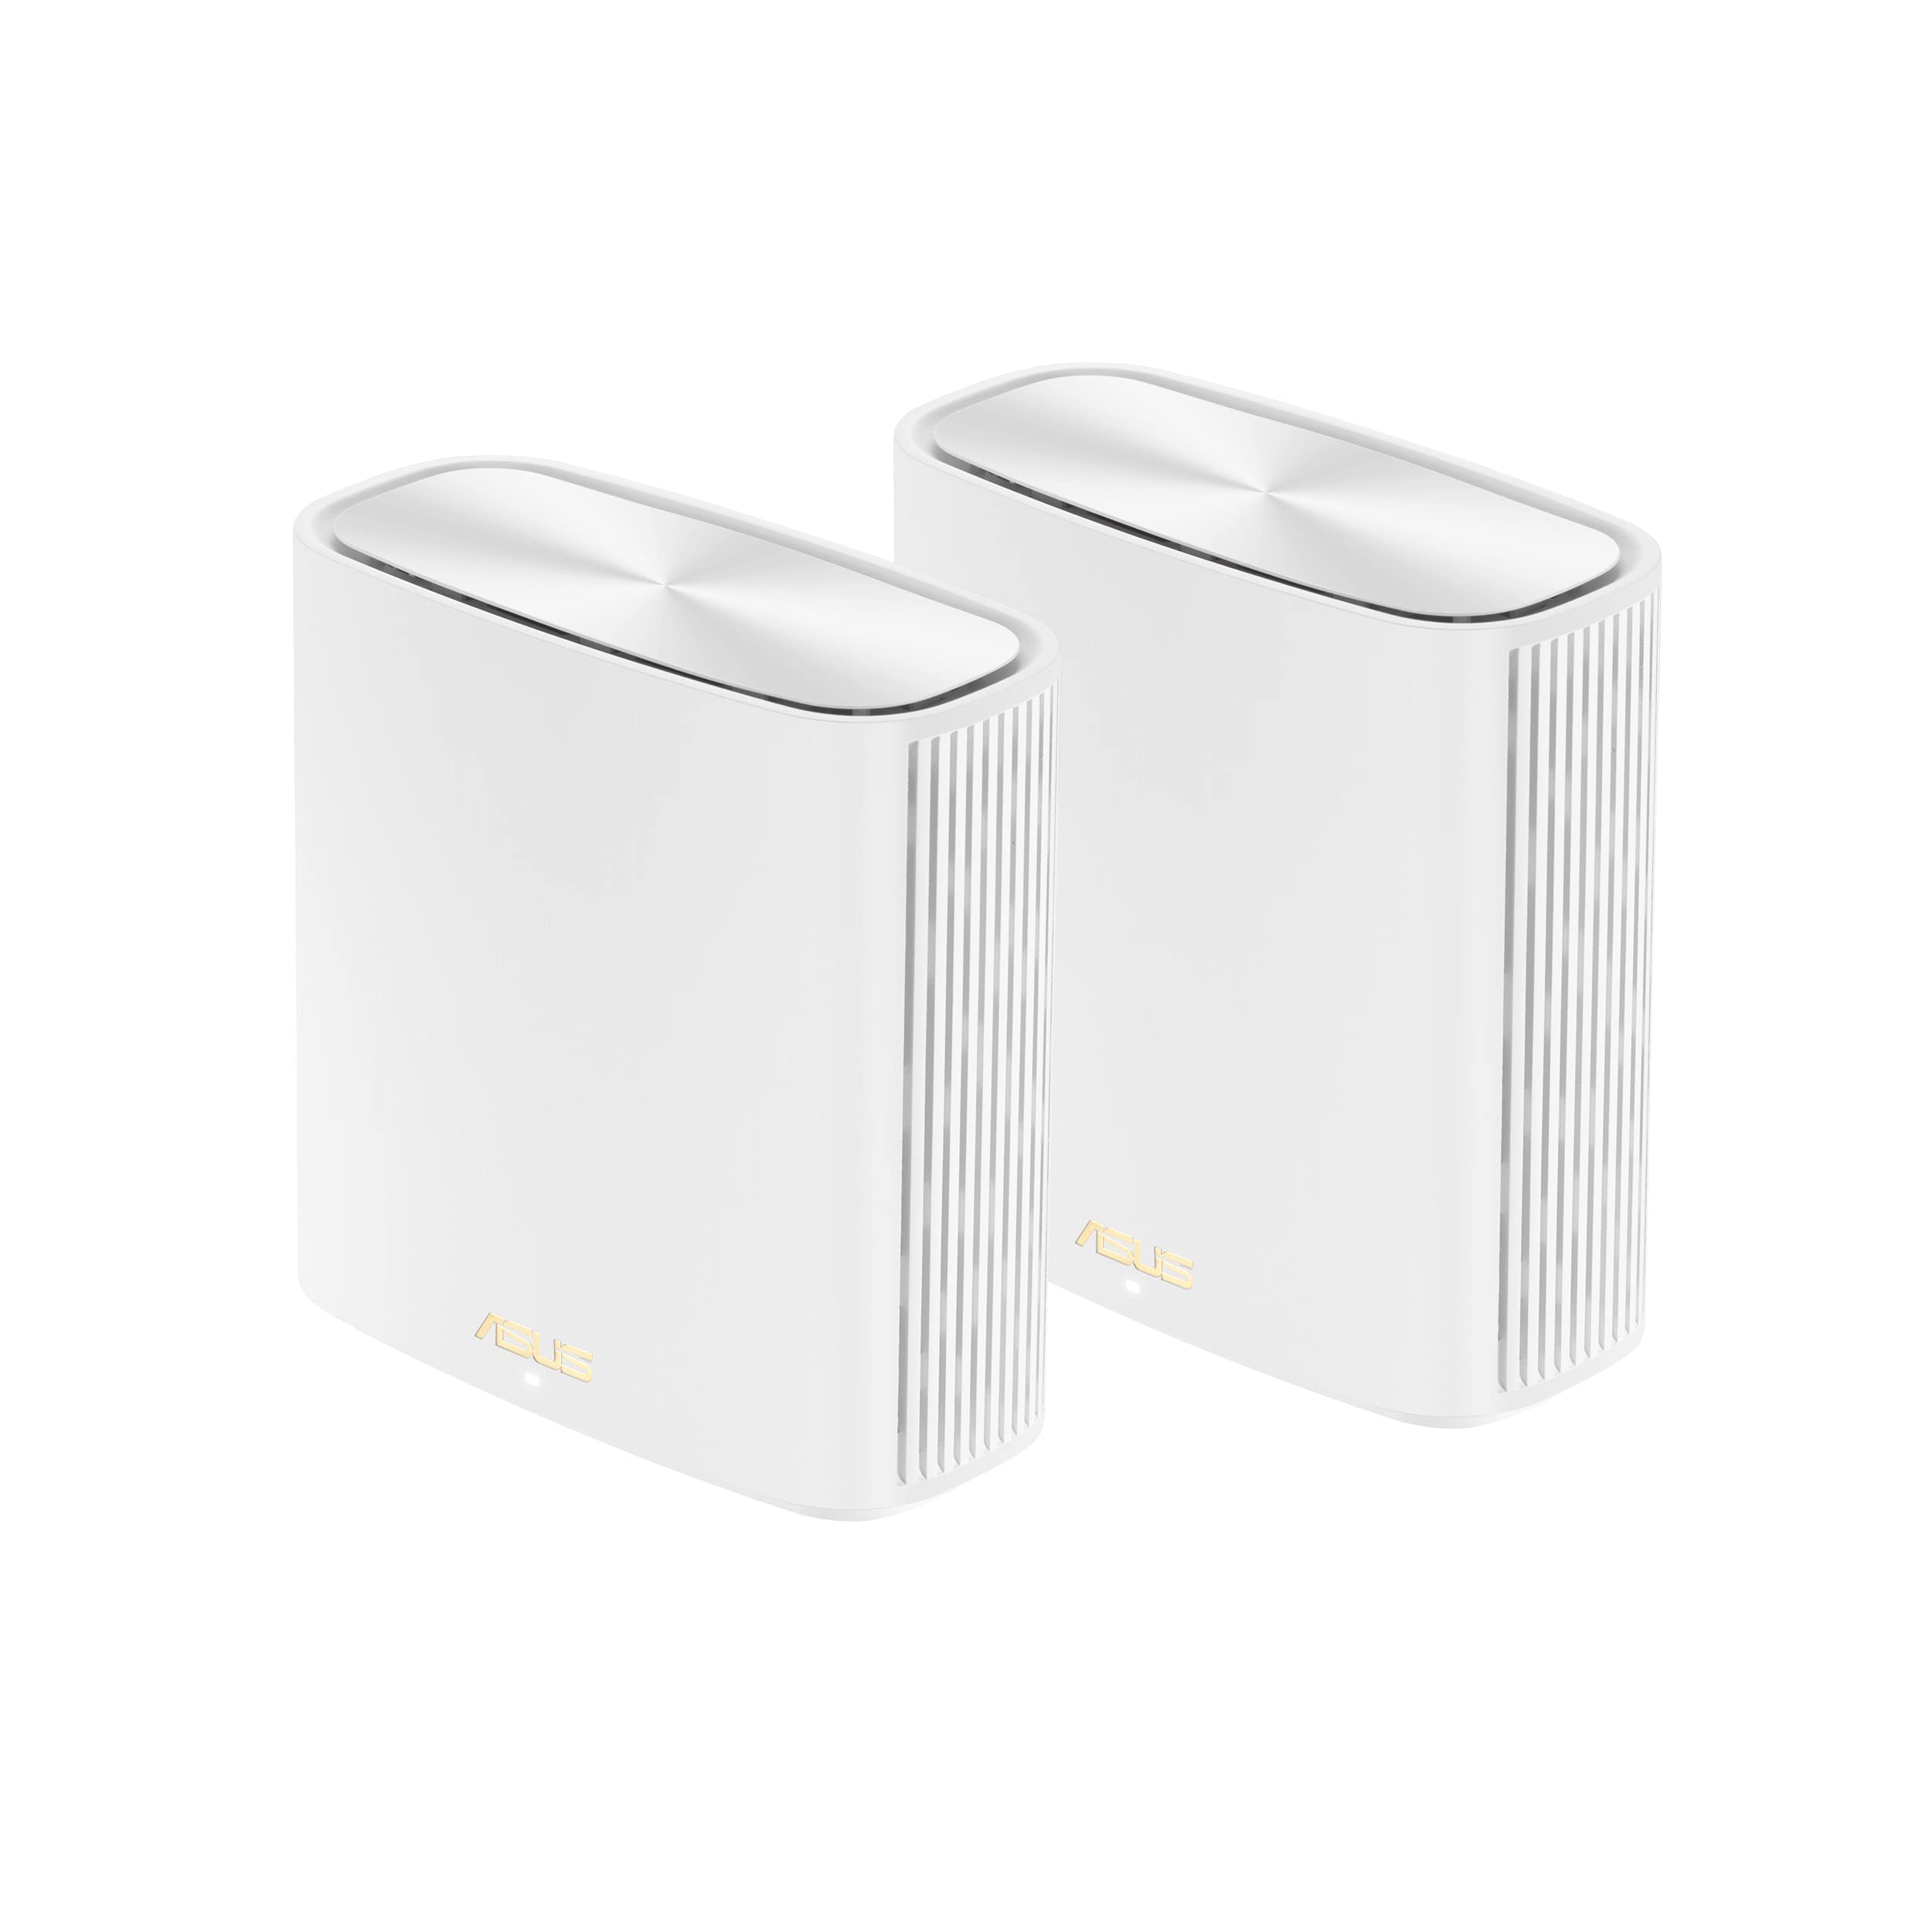 2-Pack ASUS ZenWiFi XD6 AX5400 Mesh Router $220 $219.99